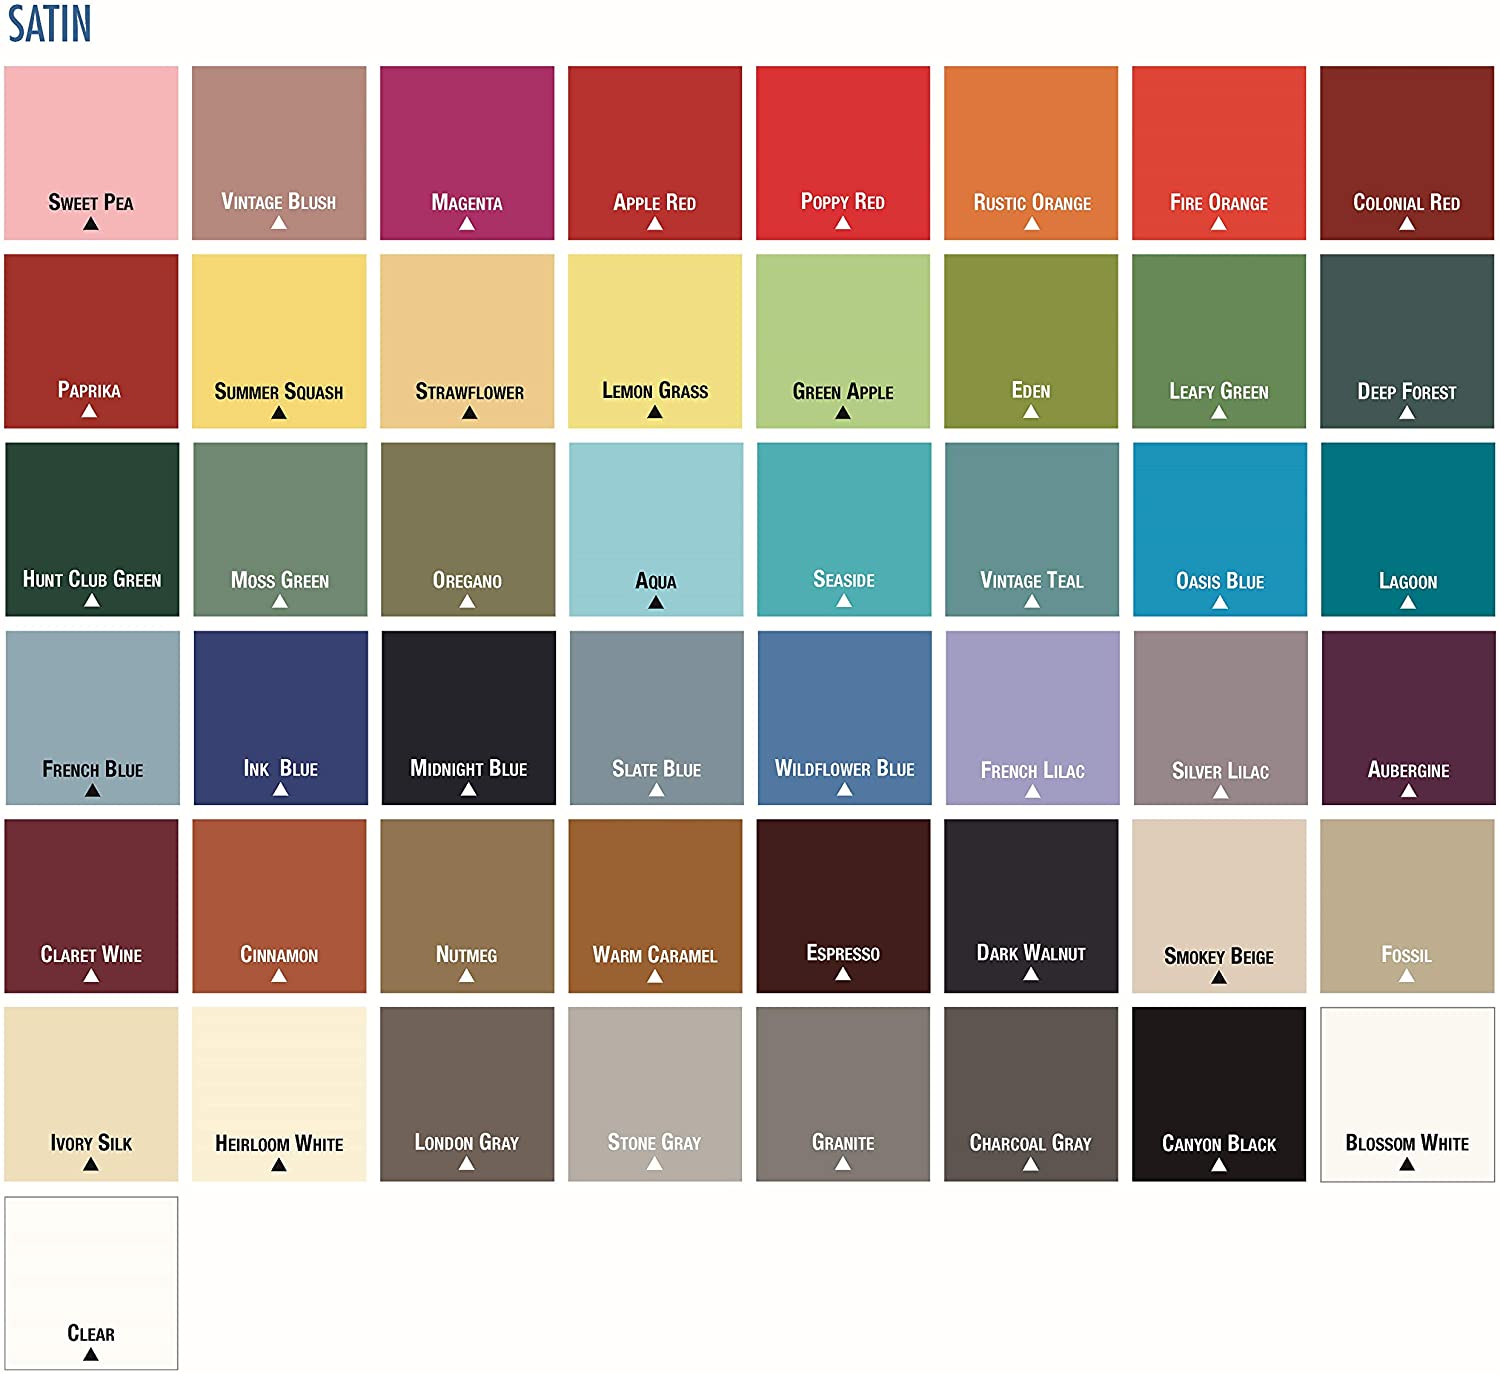 Rust-Oleum Painter's Touch shades